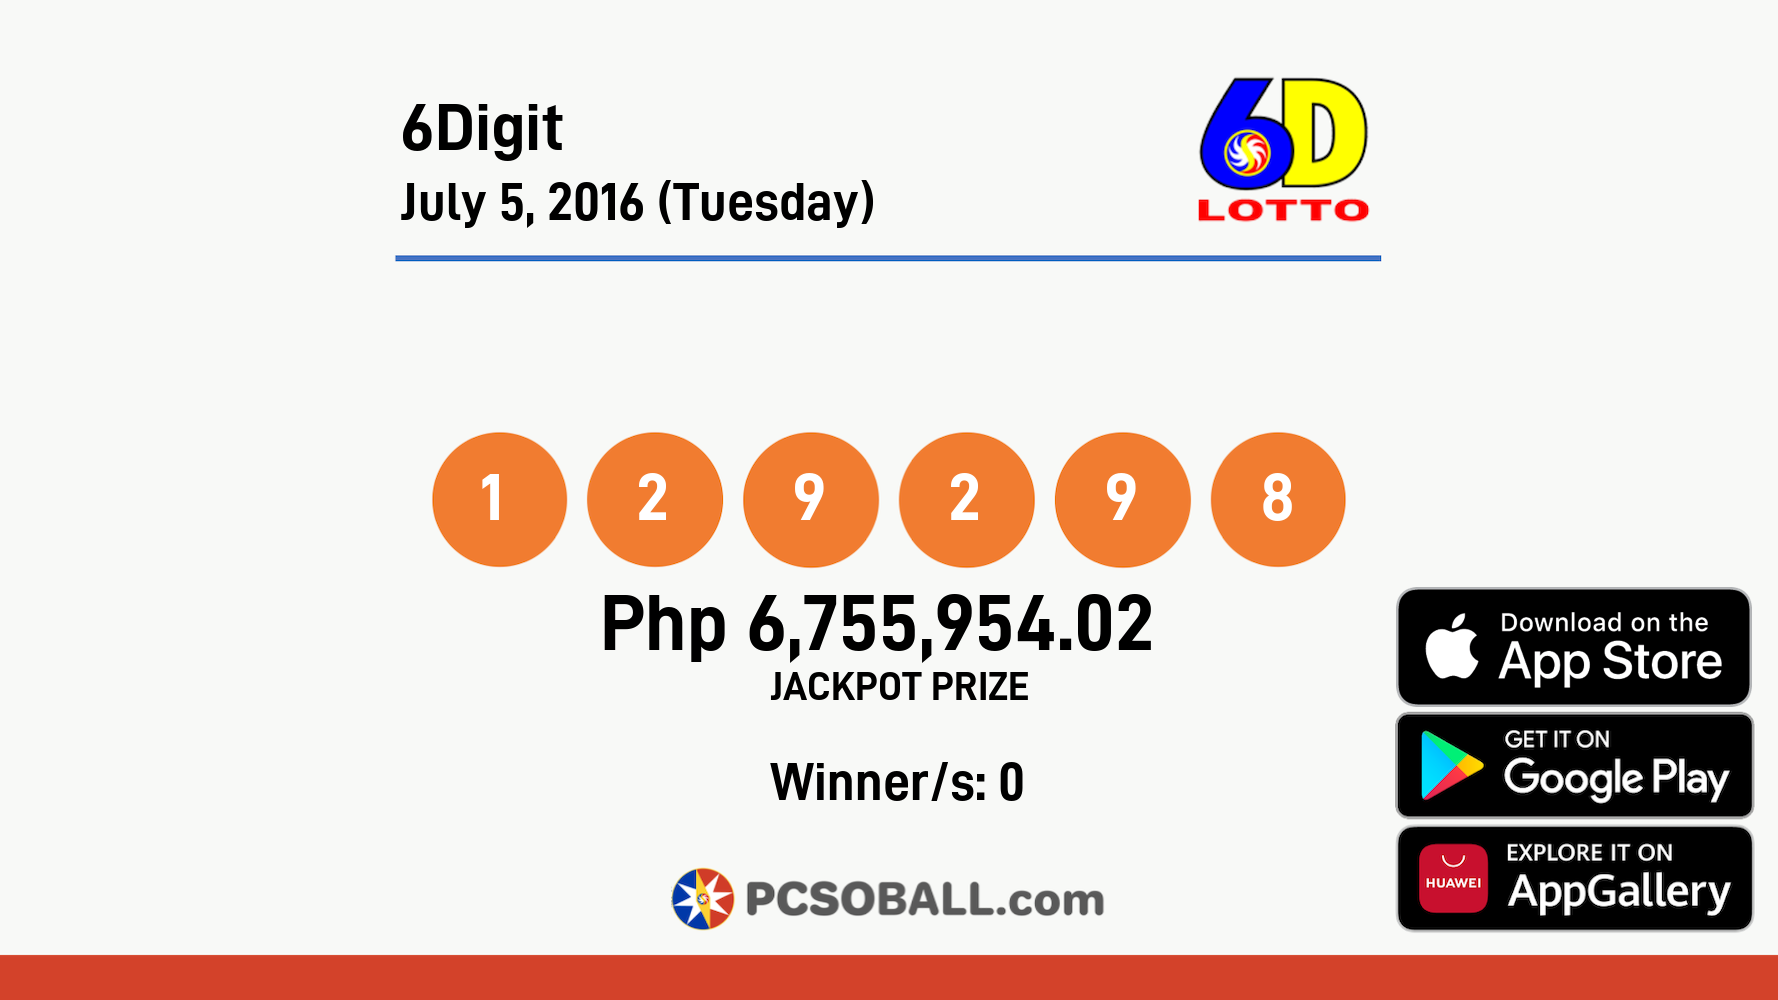 6Digit July 5, 2016 (Tuesday) Result